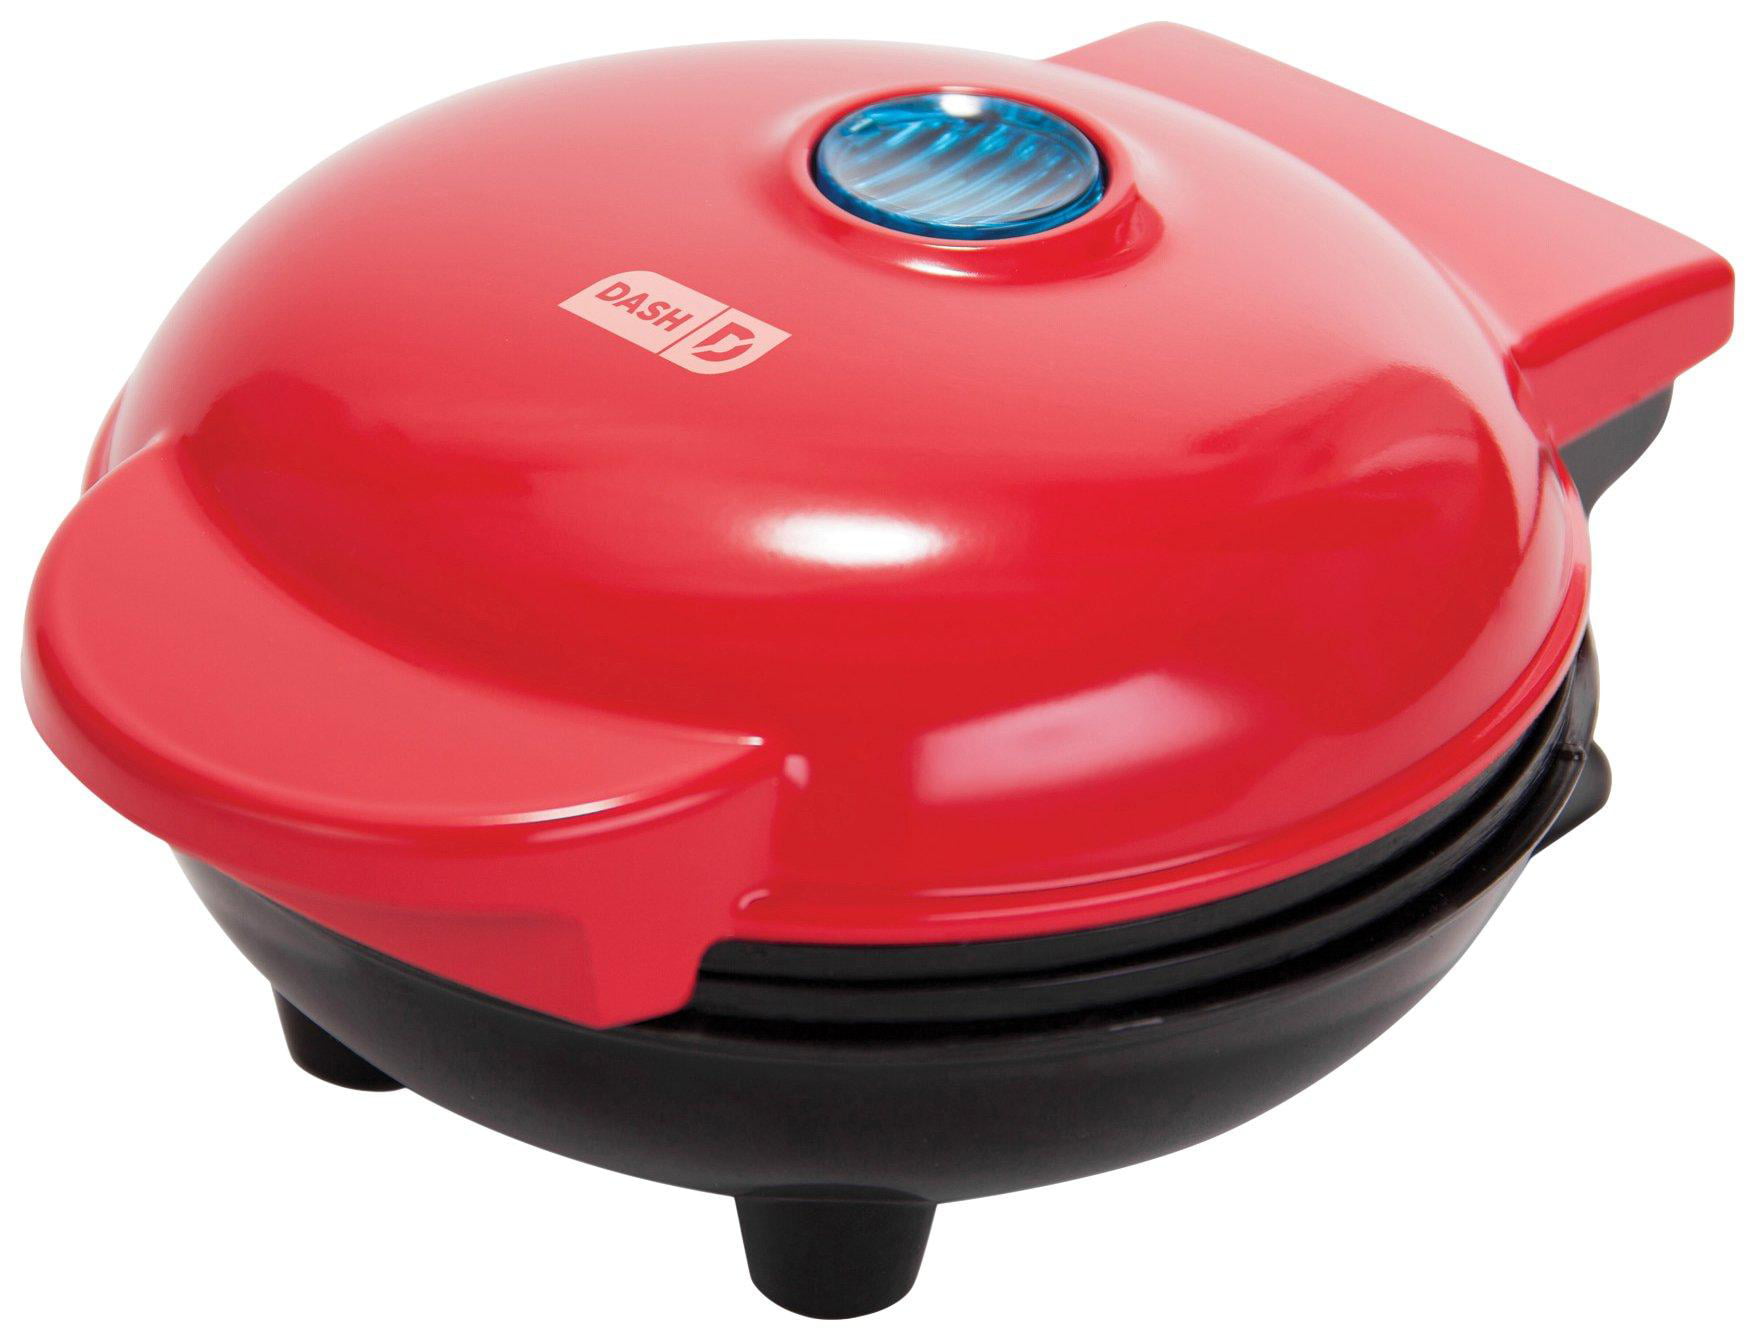 Burger Dash Dmg8100Rd 8” Express Electric Round Griddle For Pancakes Cookies 